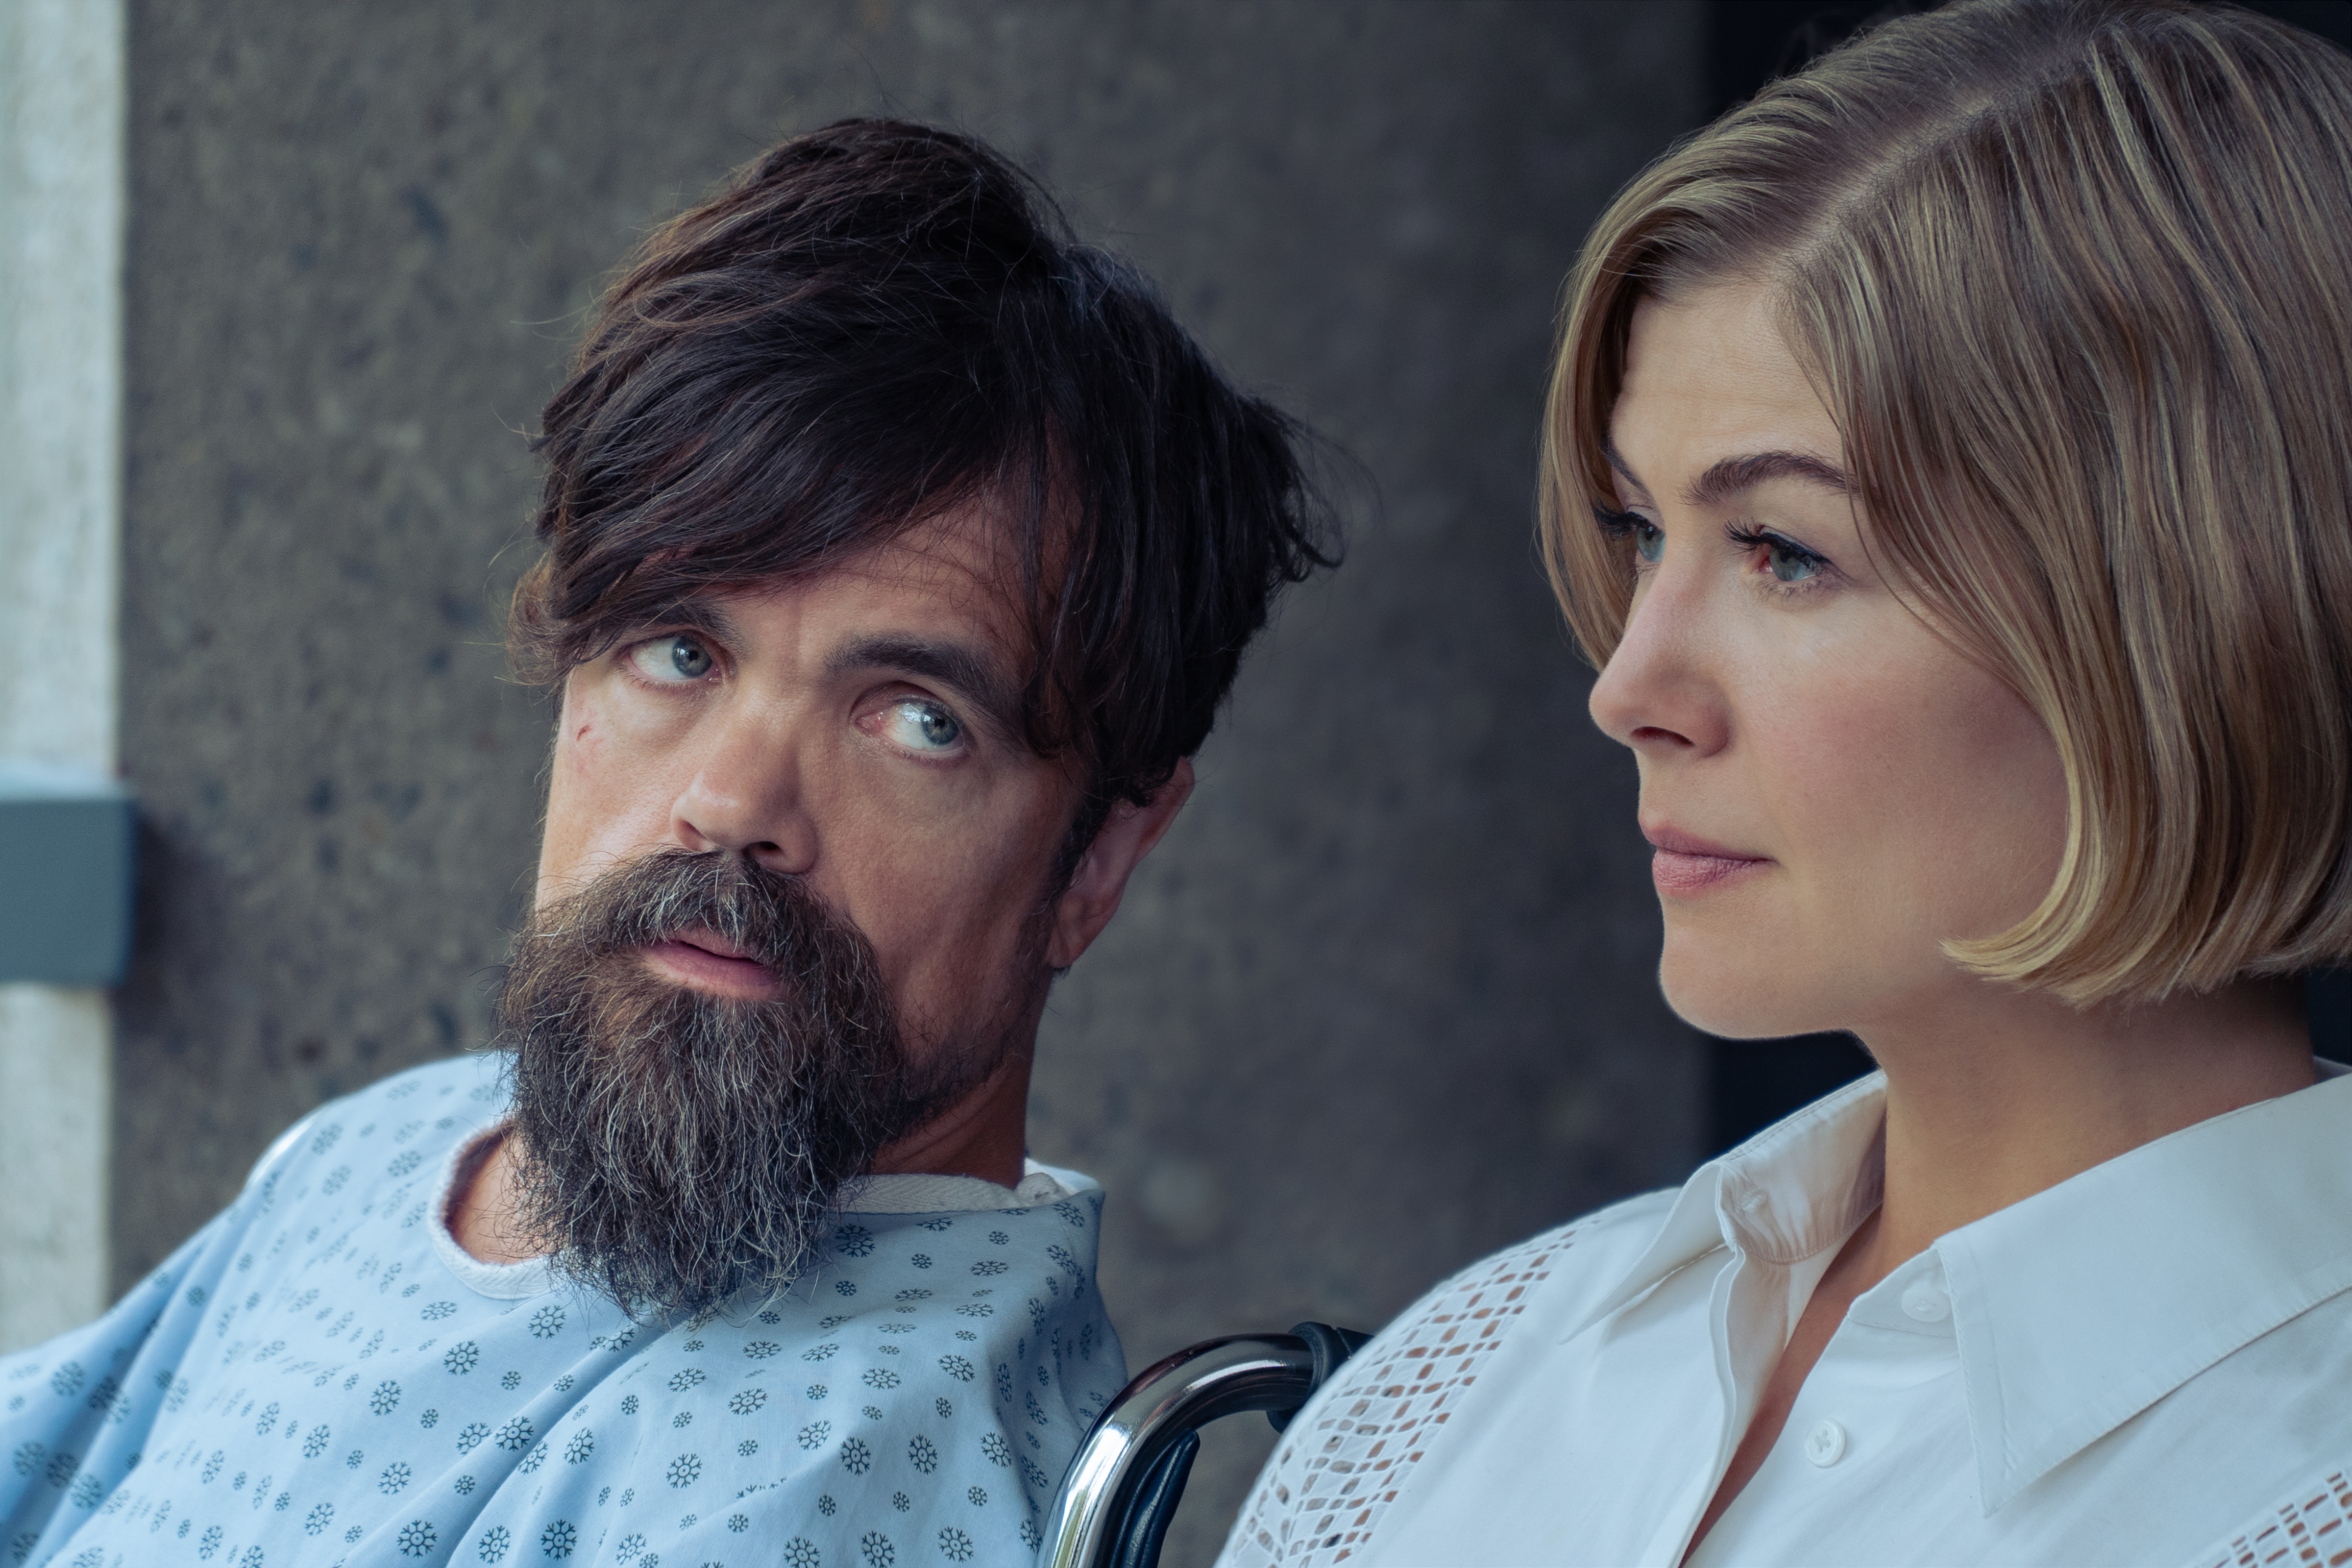 I Care A Lot Movie Review Rosamund Pike Is In Gone Girl Mode In Devilishly Entertaining Dark Comedy On Netflix Hindustan Times